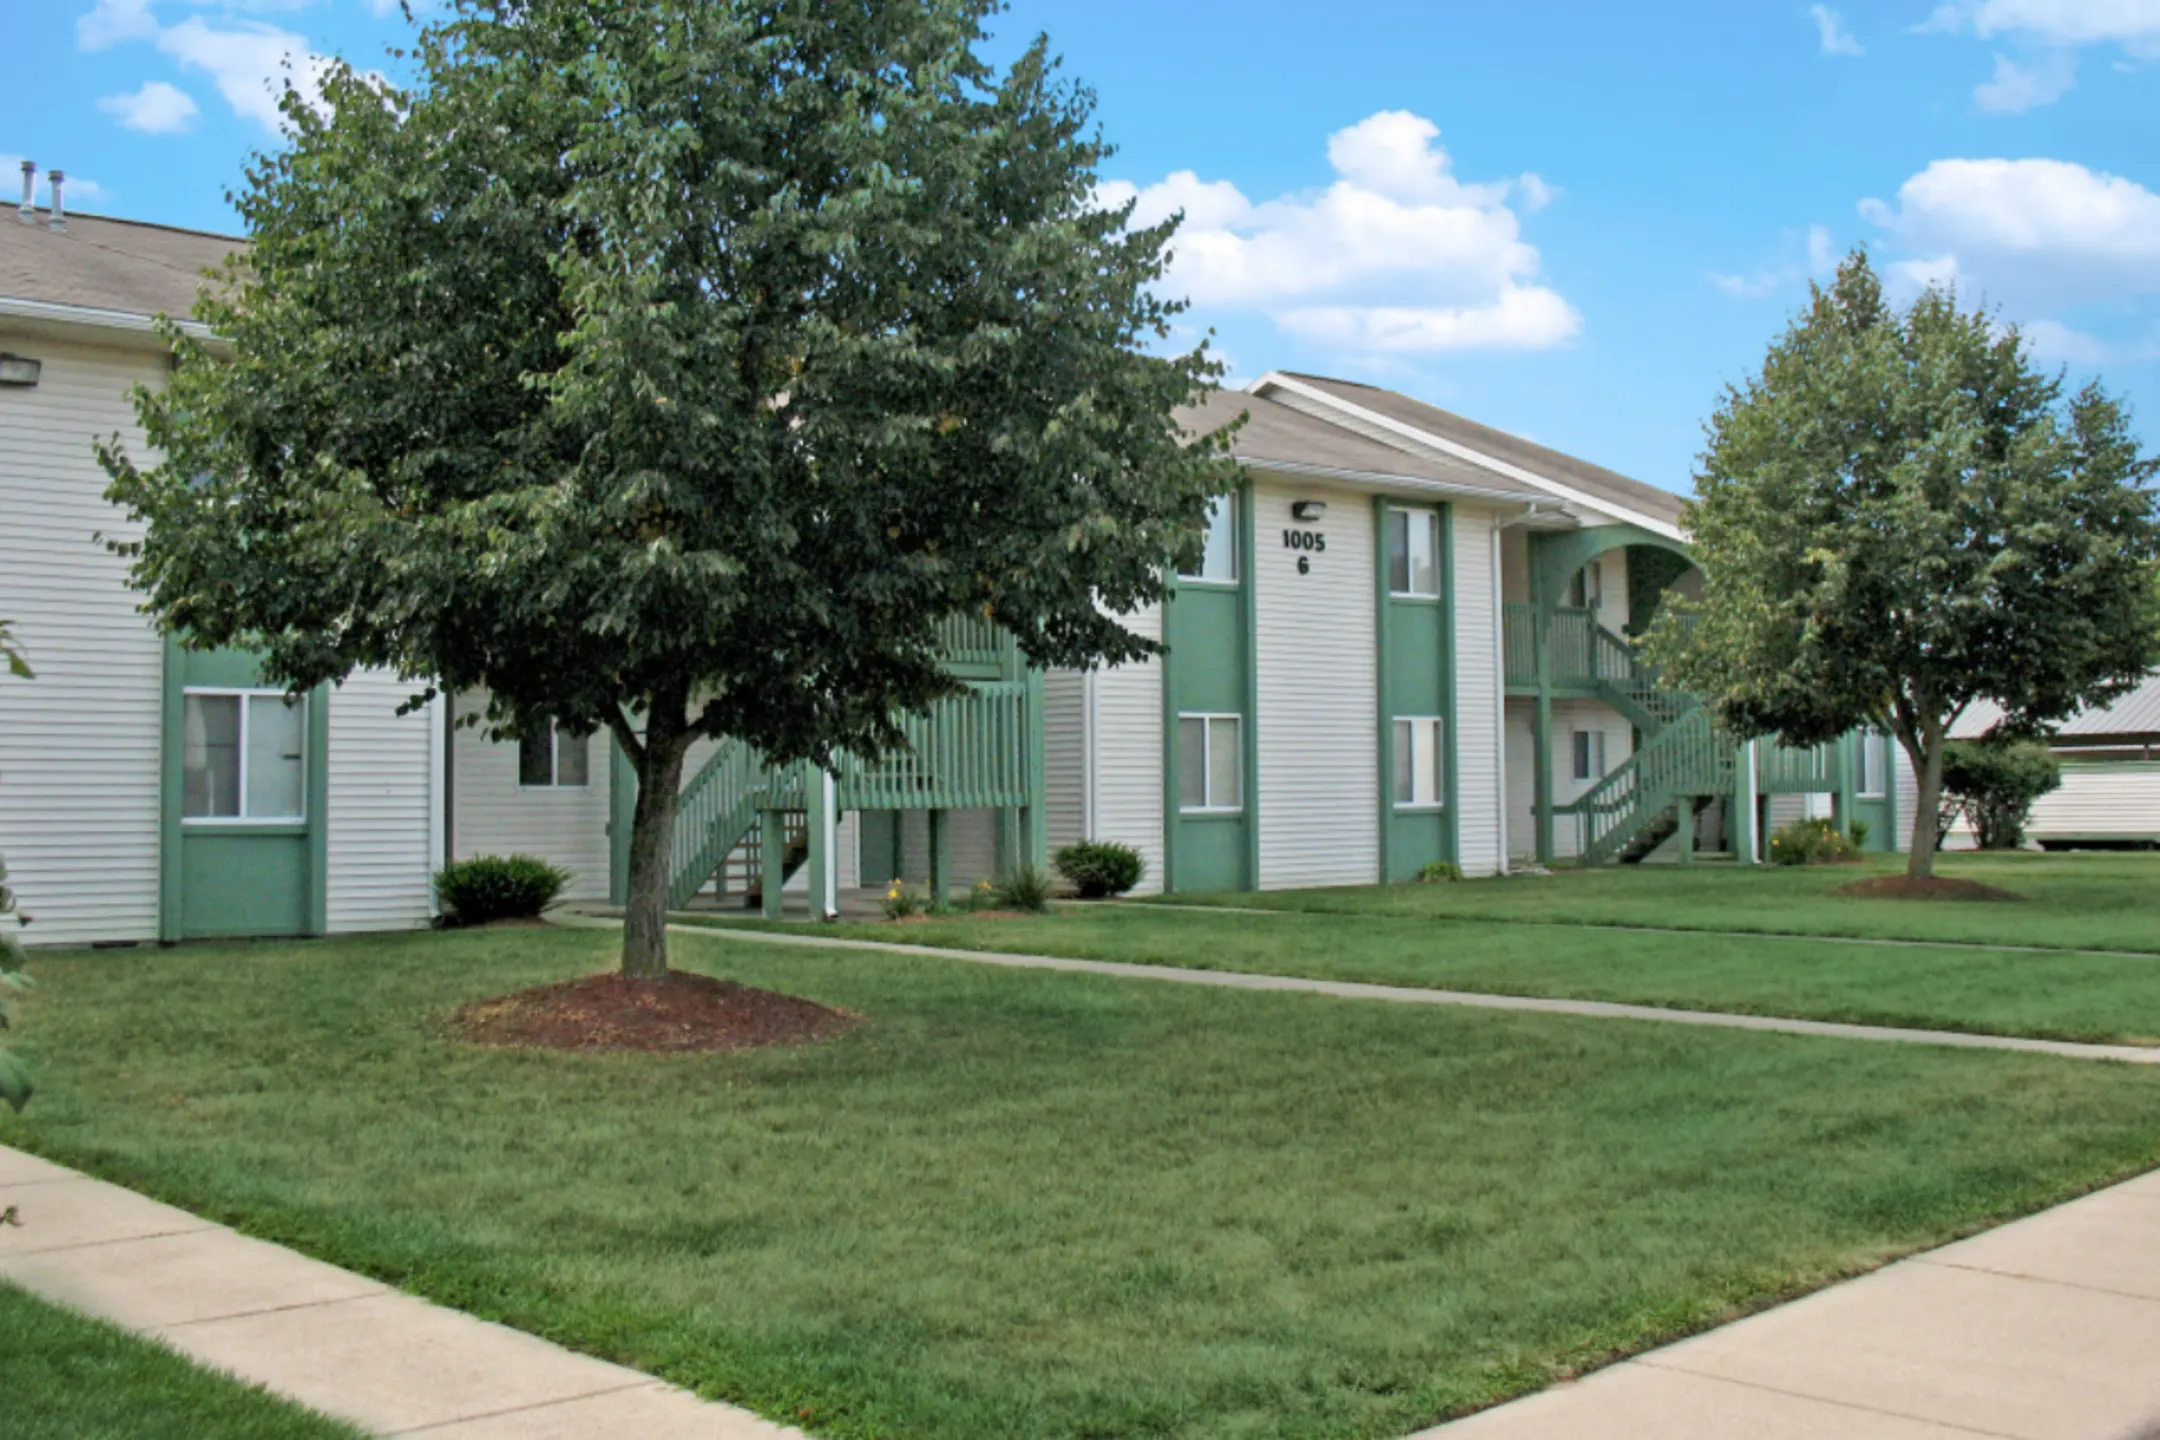 Building - Country View Apartments - Toledo, OH